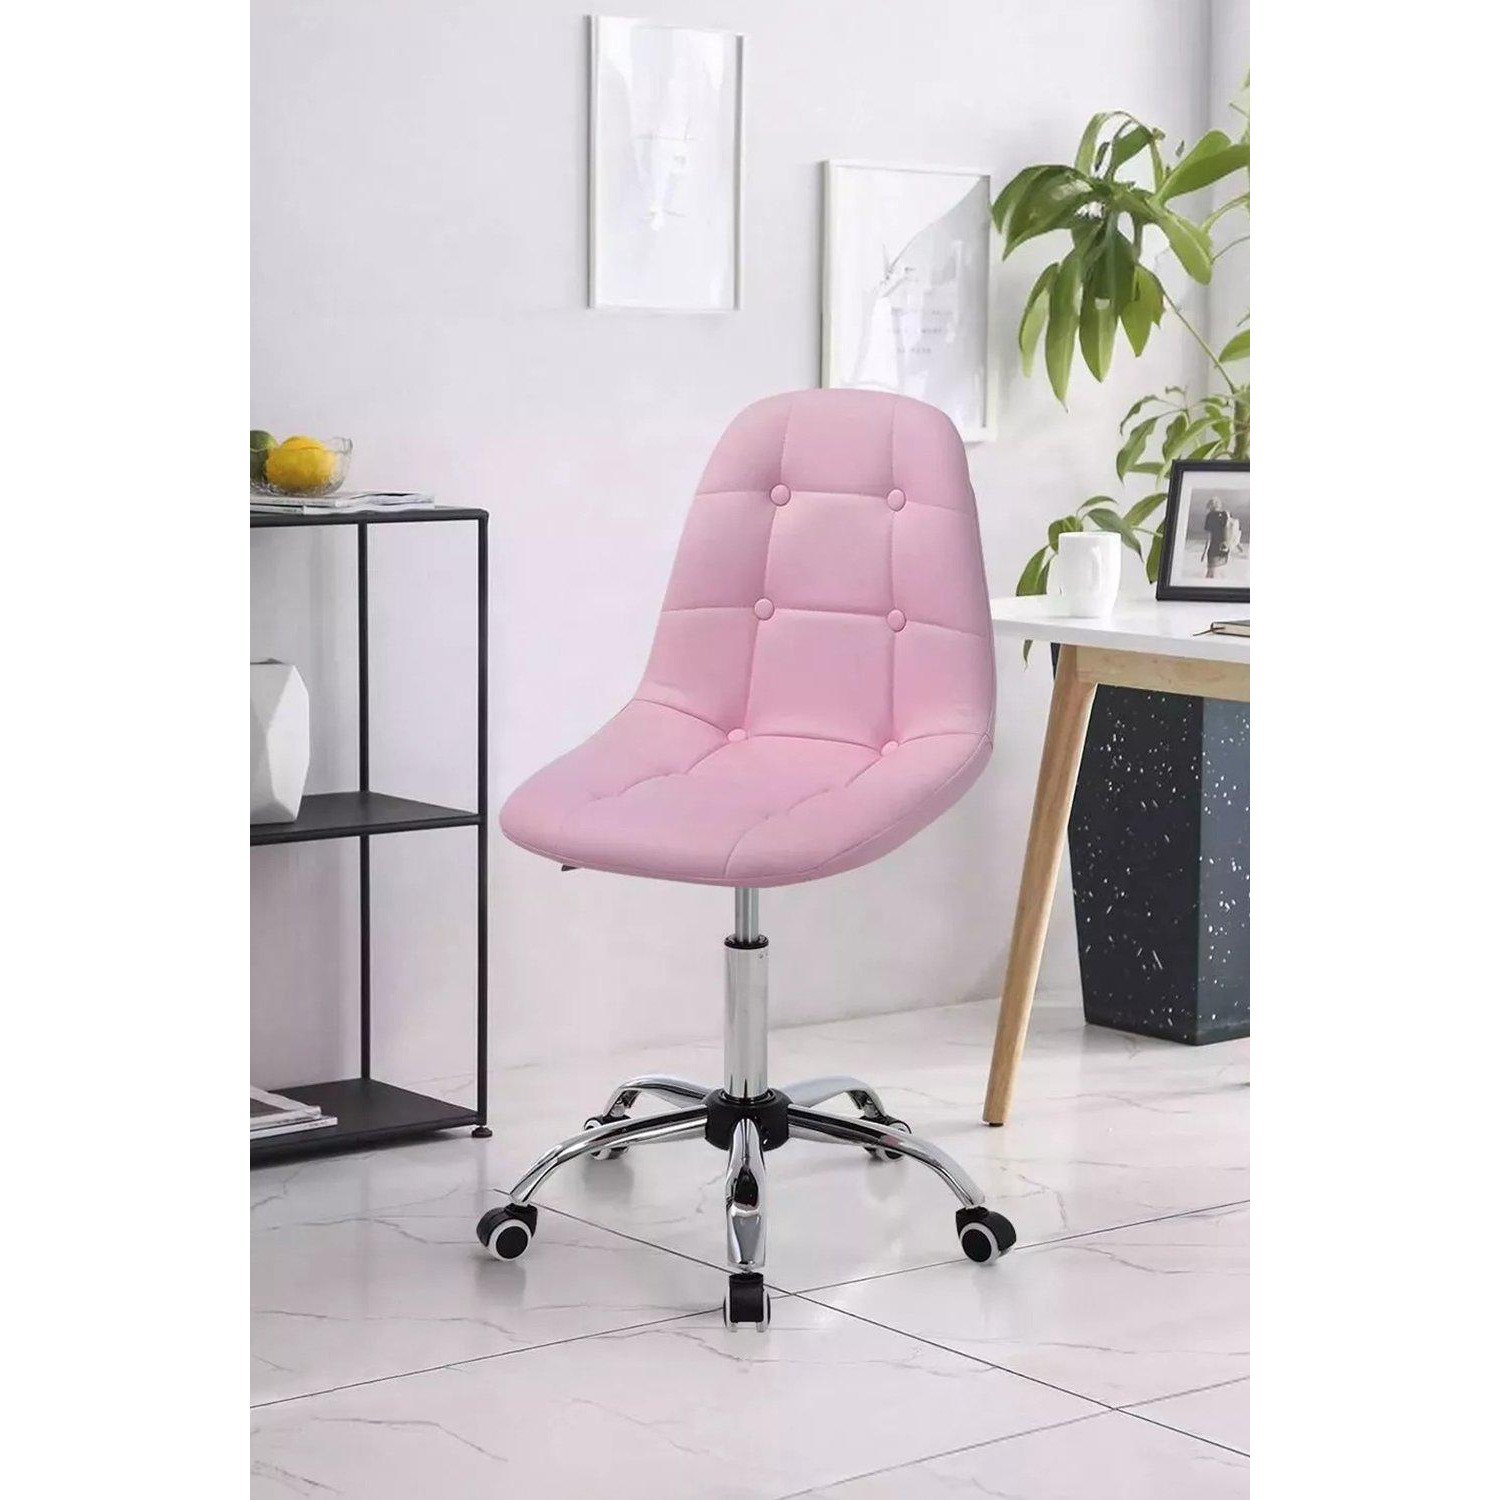 Contemporary PU Leather Chrome Base Swivel Office Chair - image 1